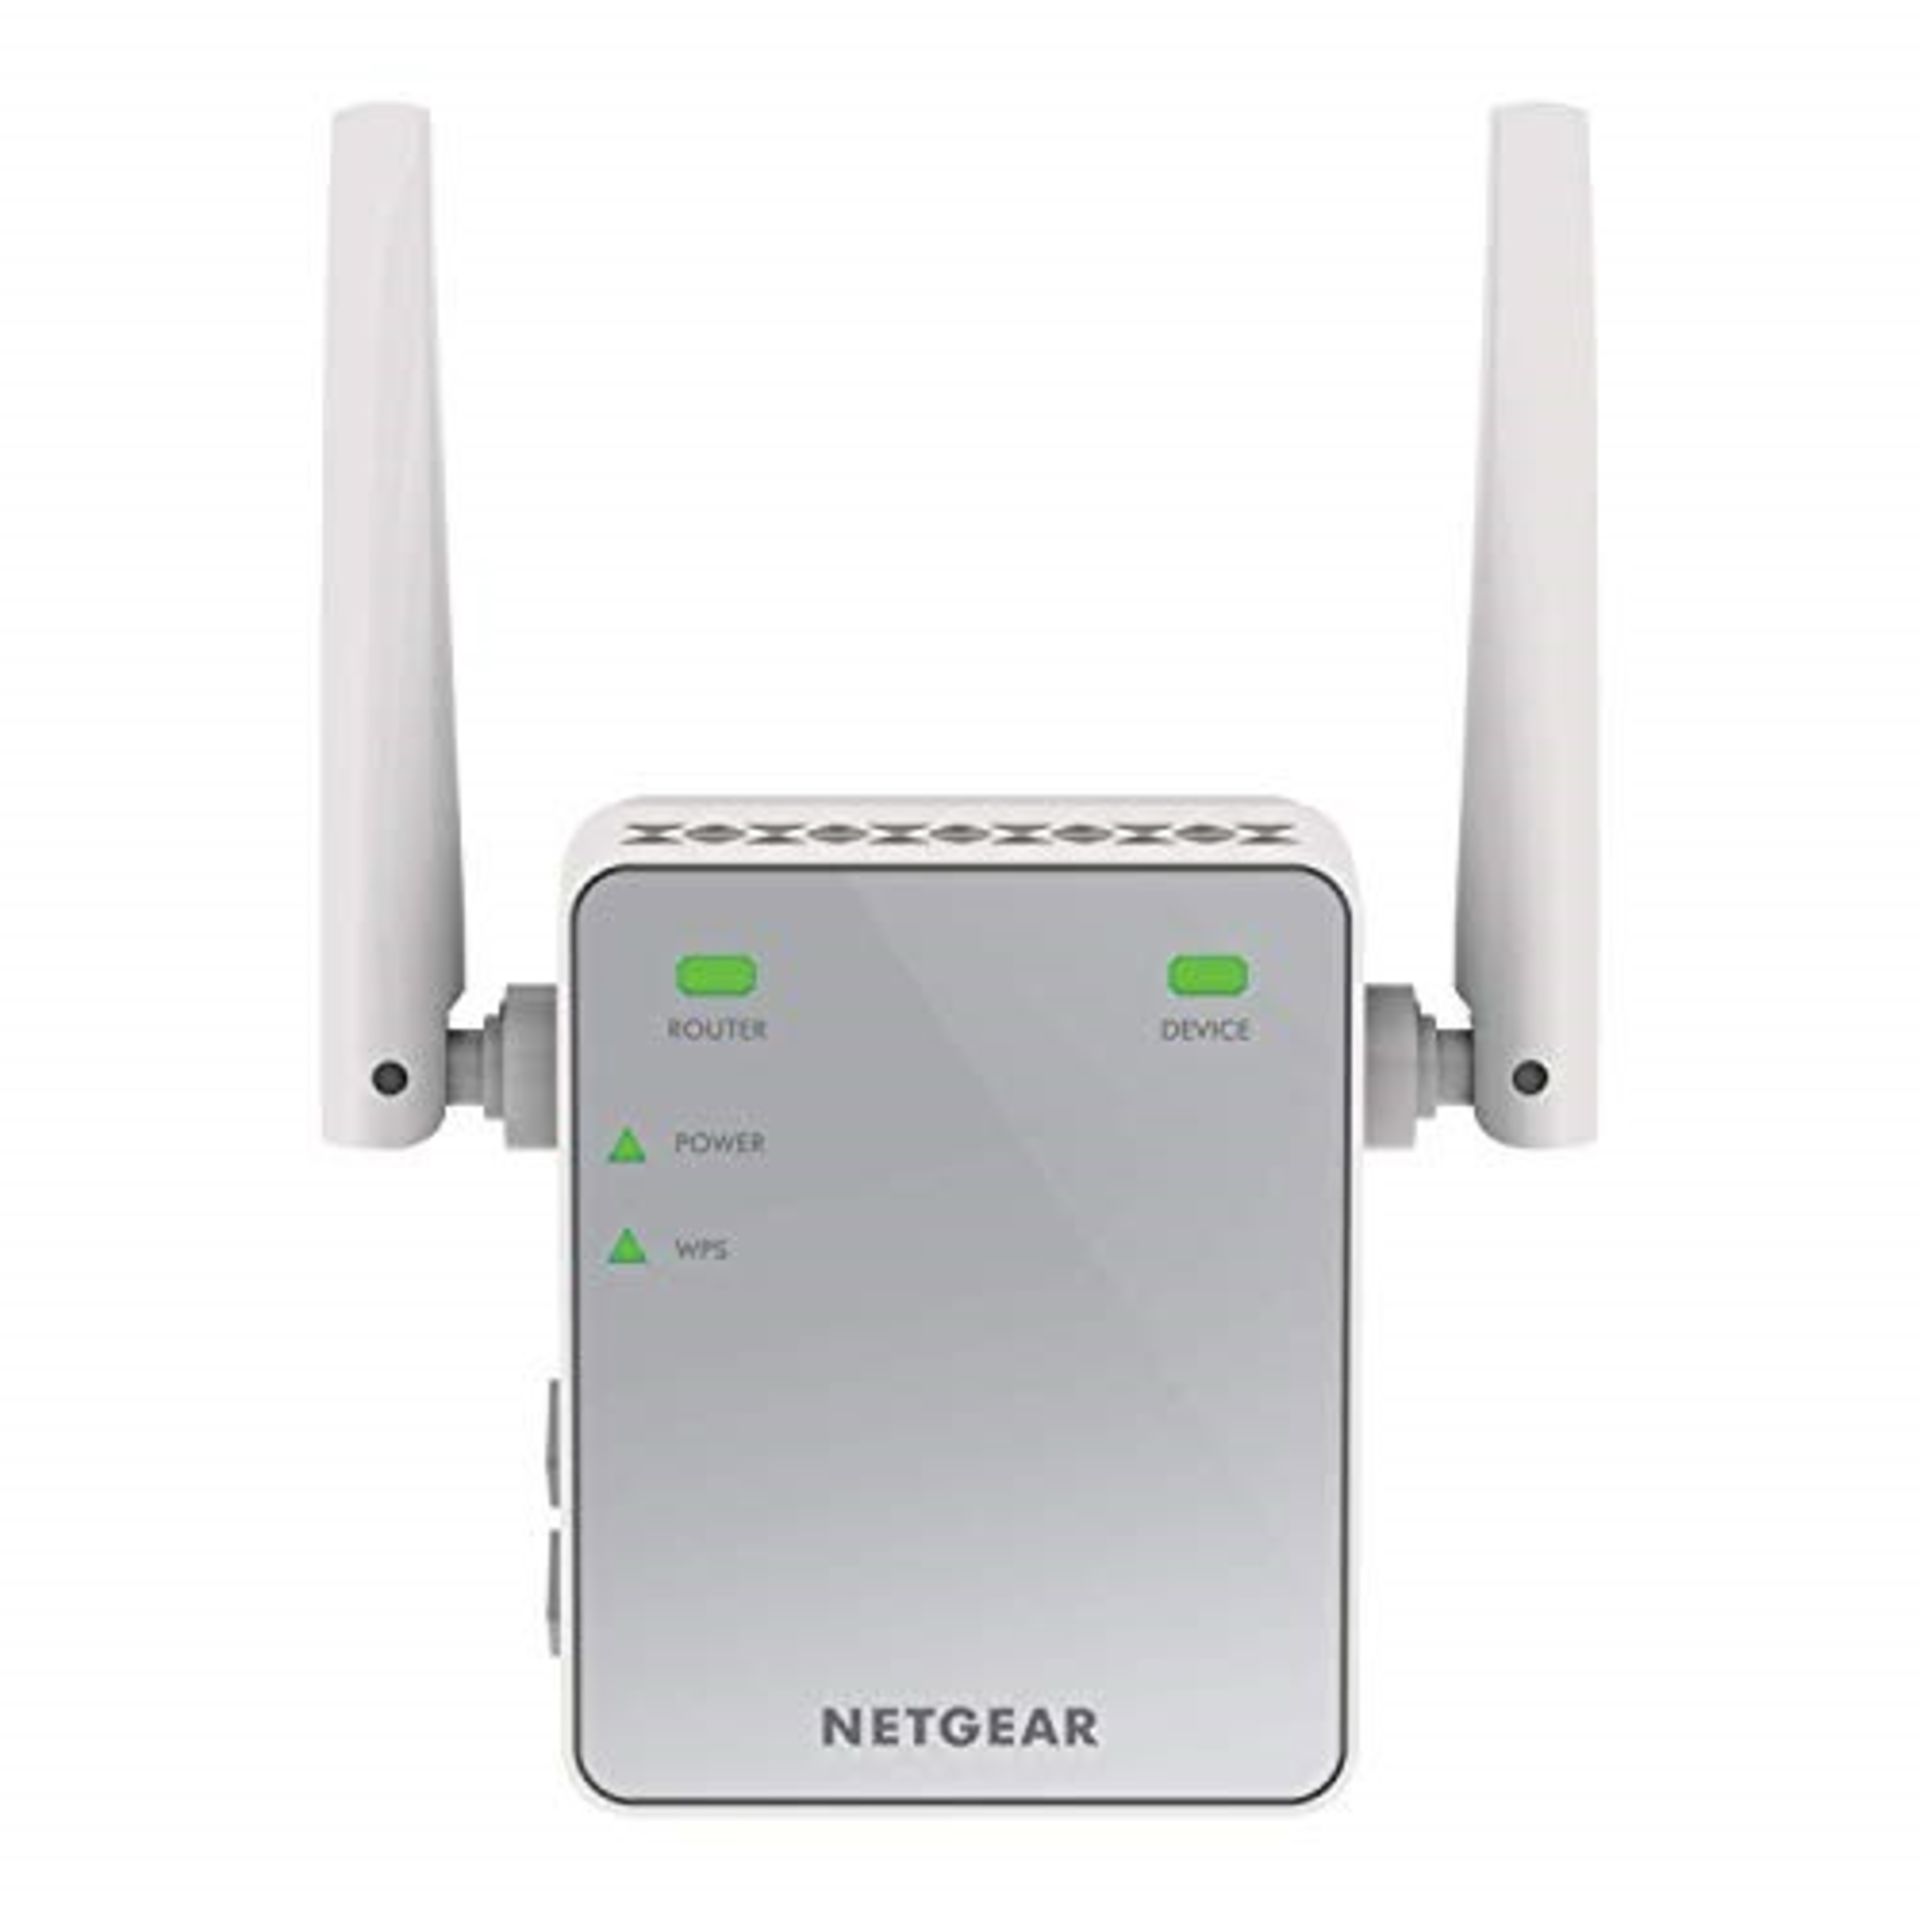 NETGEAR Wi-Fi Range Extender EX2700 - Coverage up to 600 sq.ft. and 10 devices with N3